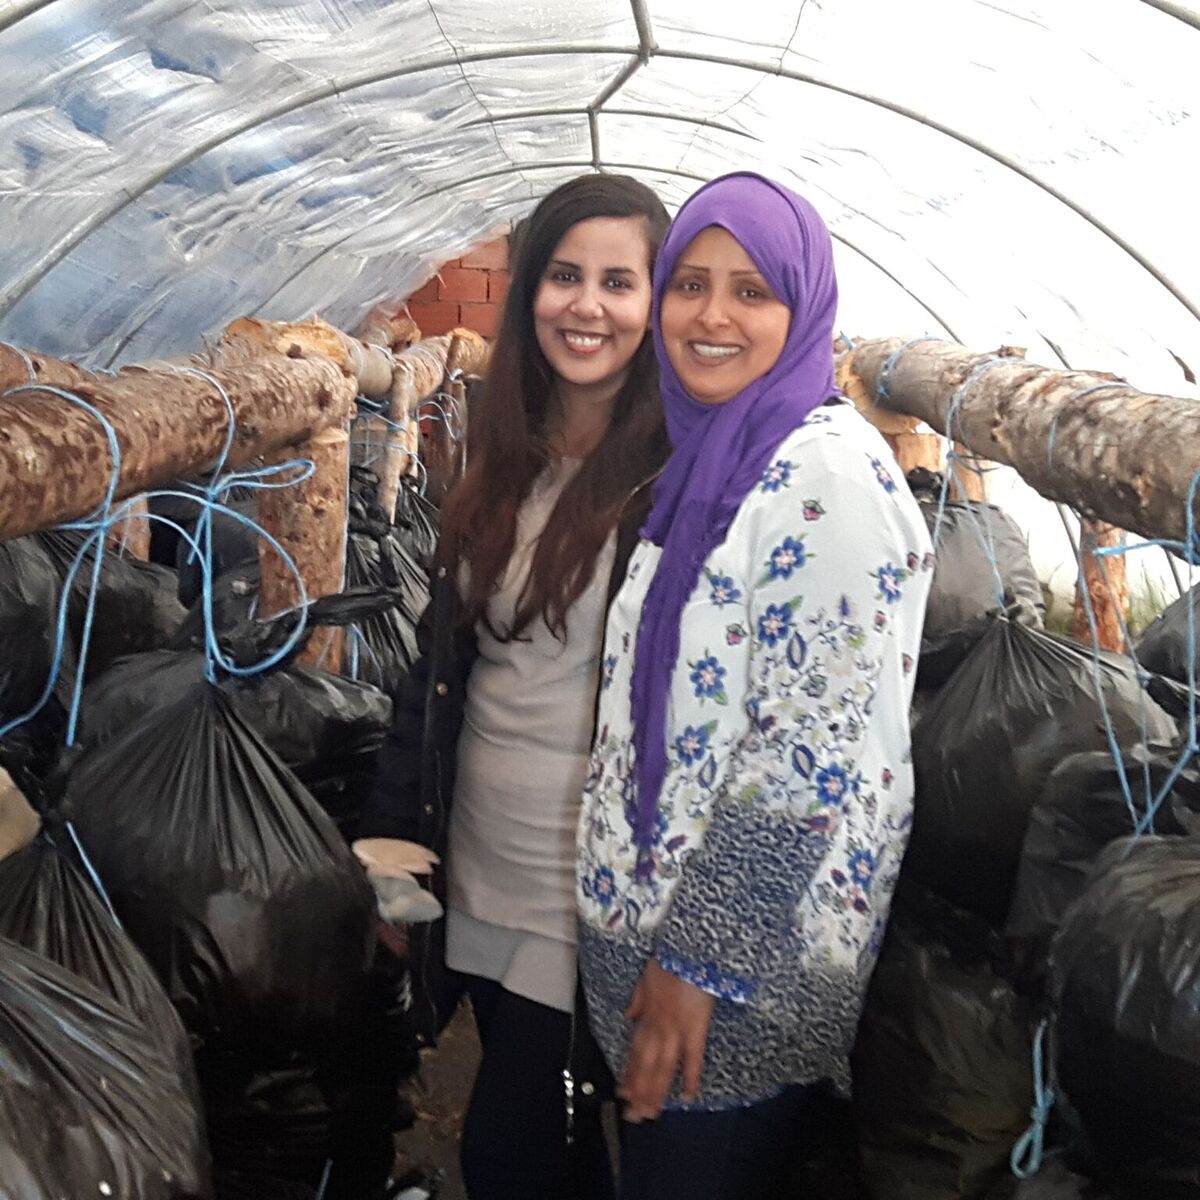 Fikra programmes support community projects in Tunisia, in this case a small mushroom growing enterprise.